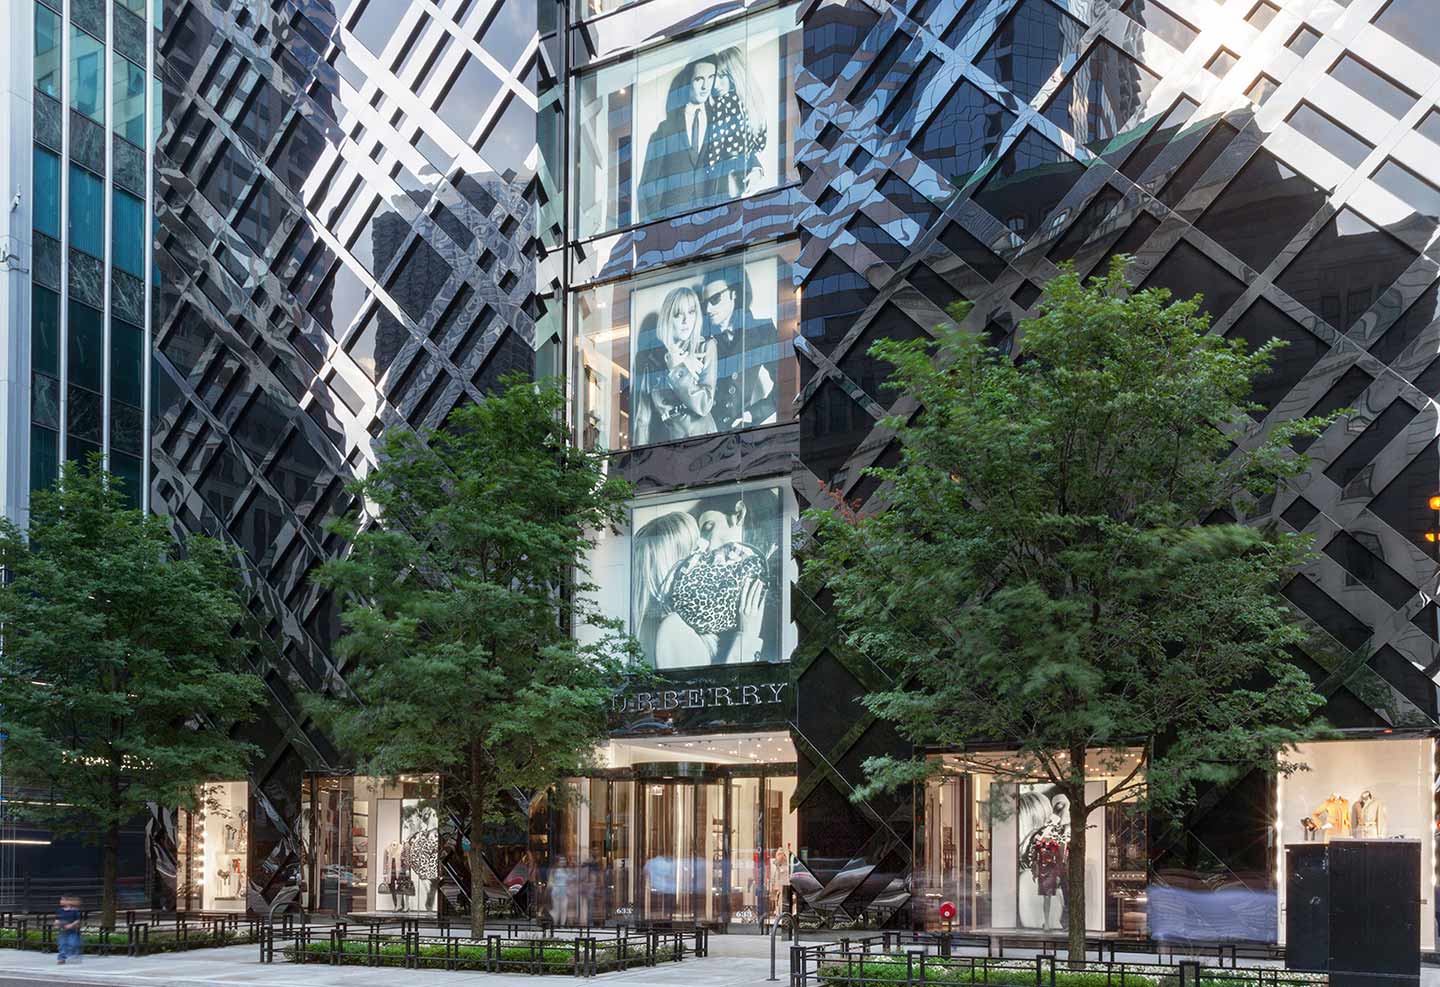 Burberry Chicago flagship store on Michigan Avenue.